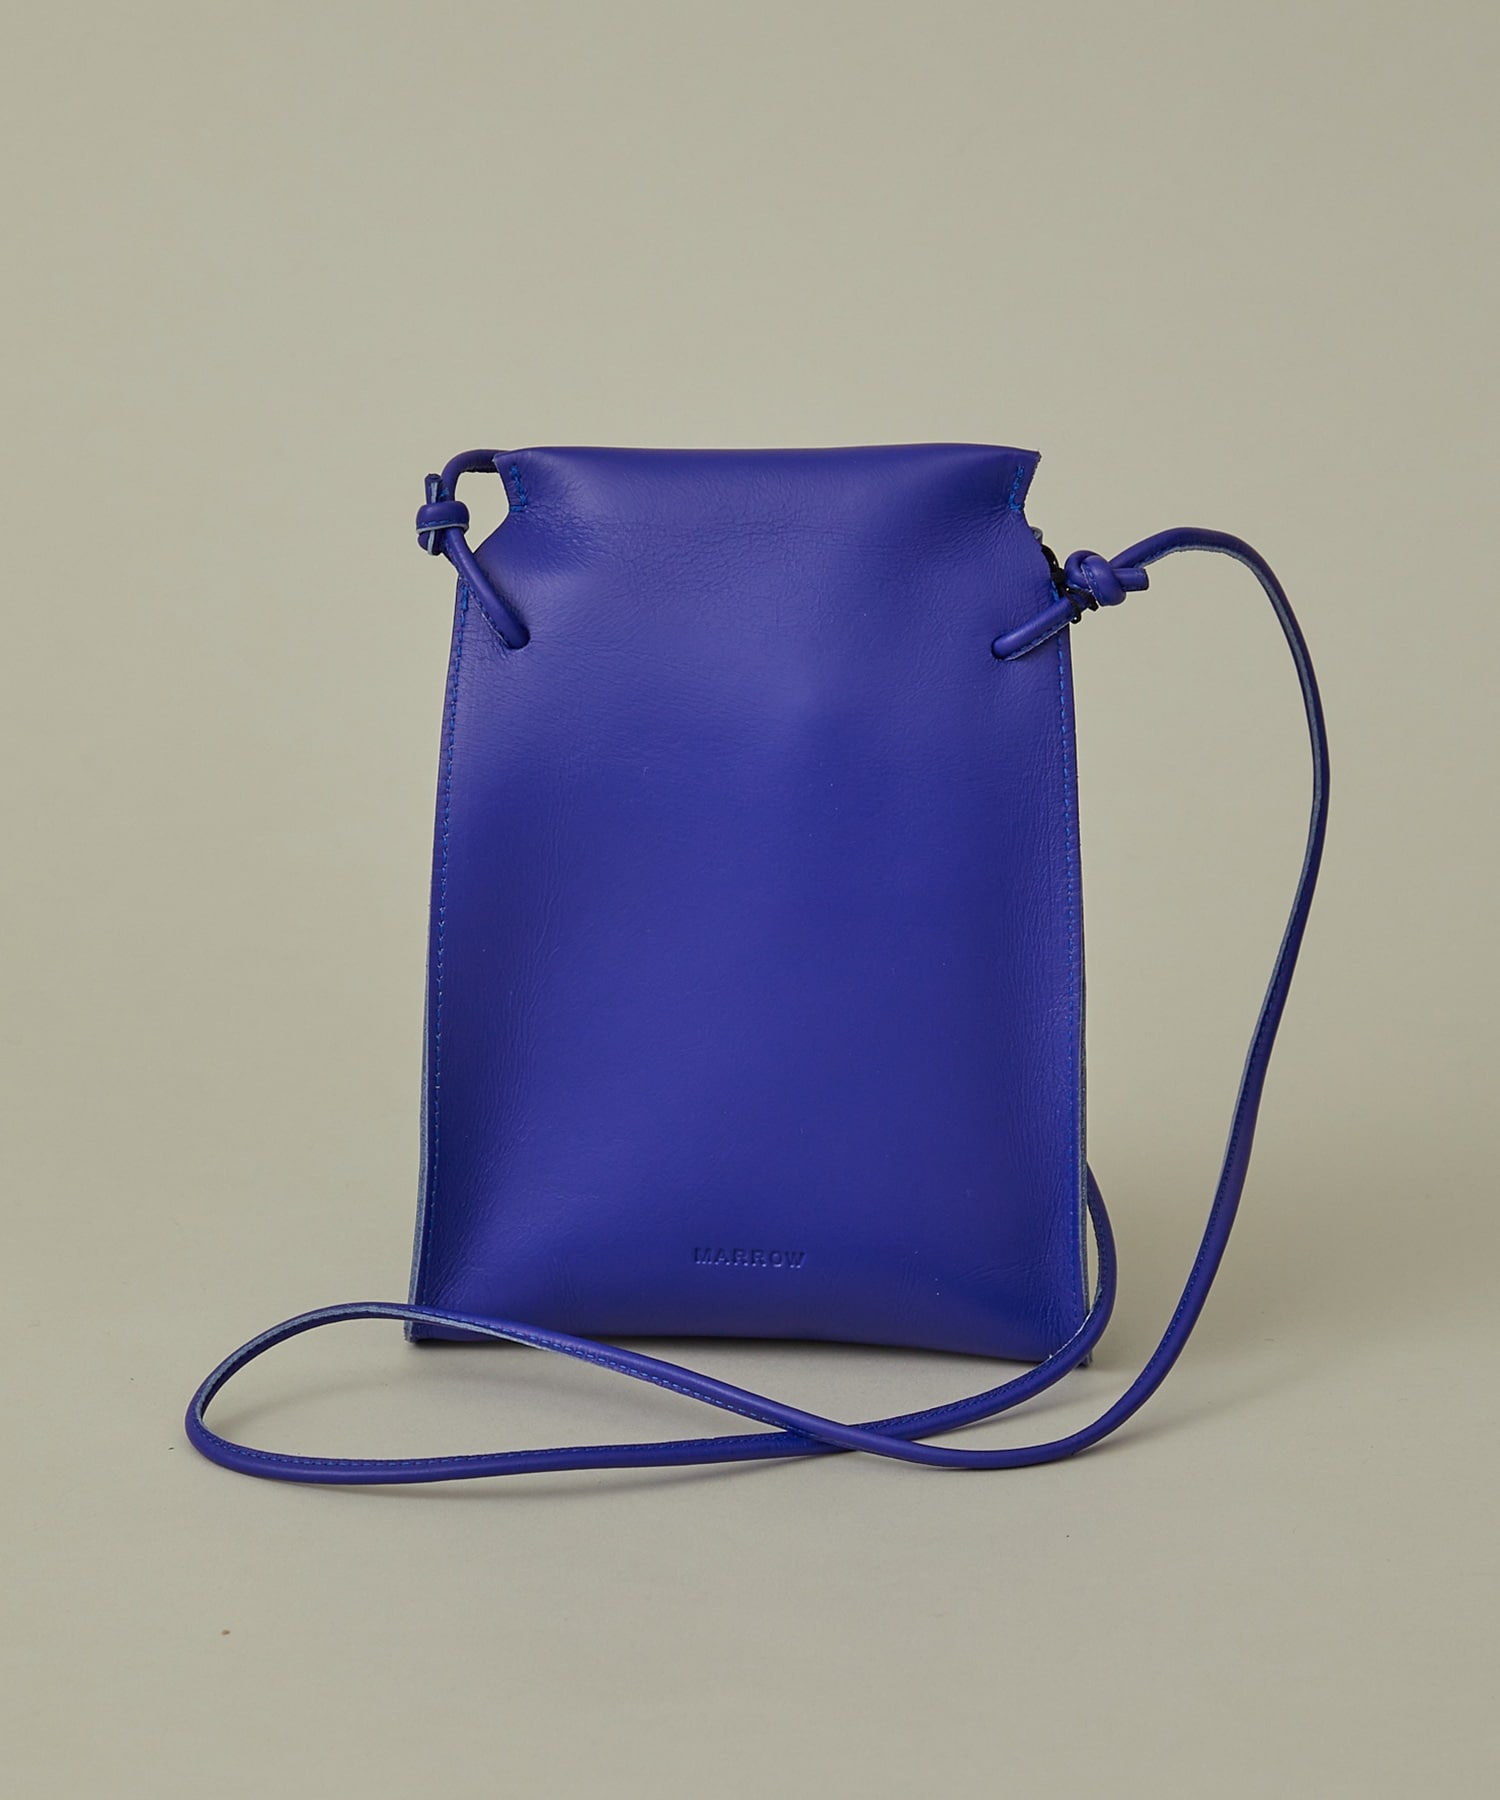 BENT POUCH(FREE BLUE): MARROW: WOMENS｜ STUDIOUS ONLINE公式通販サイト